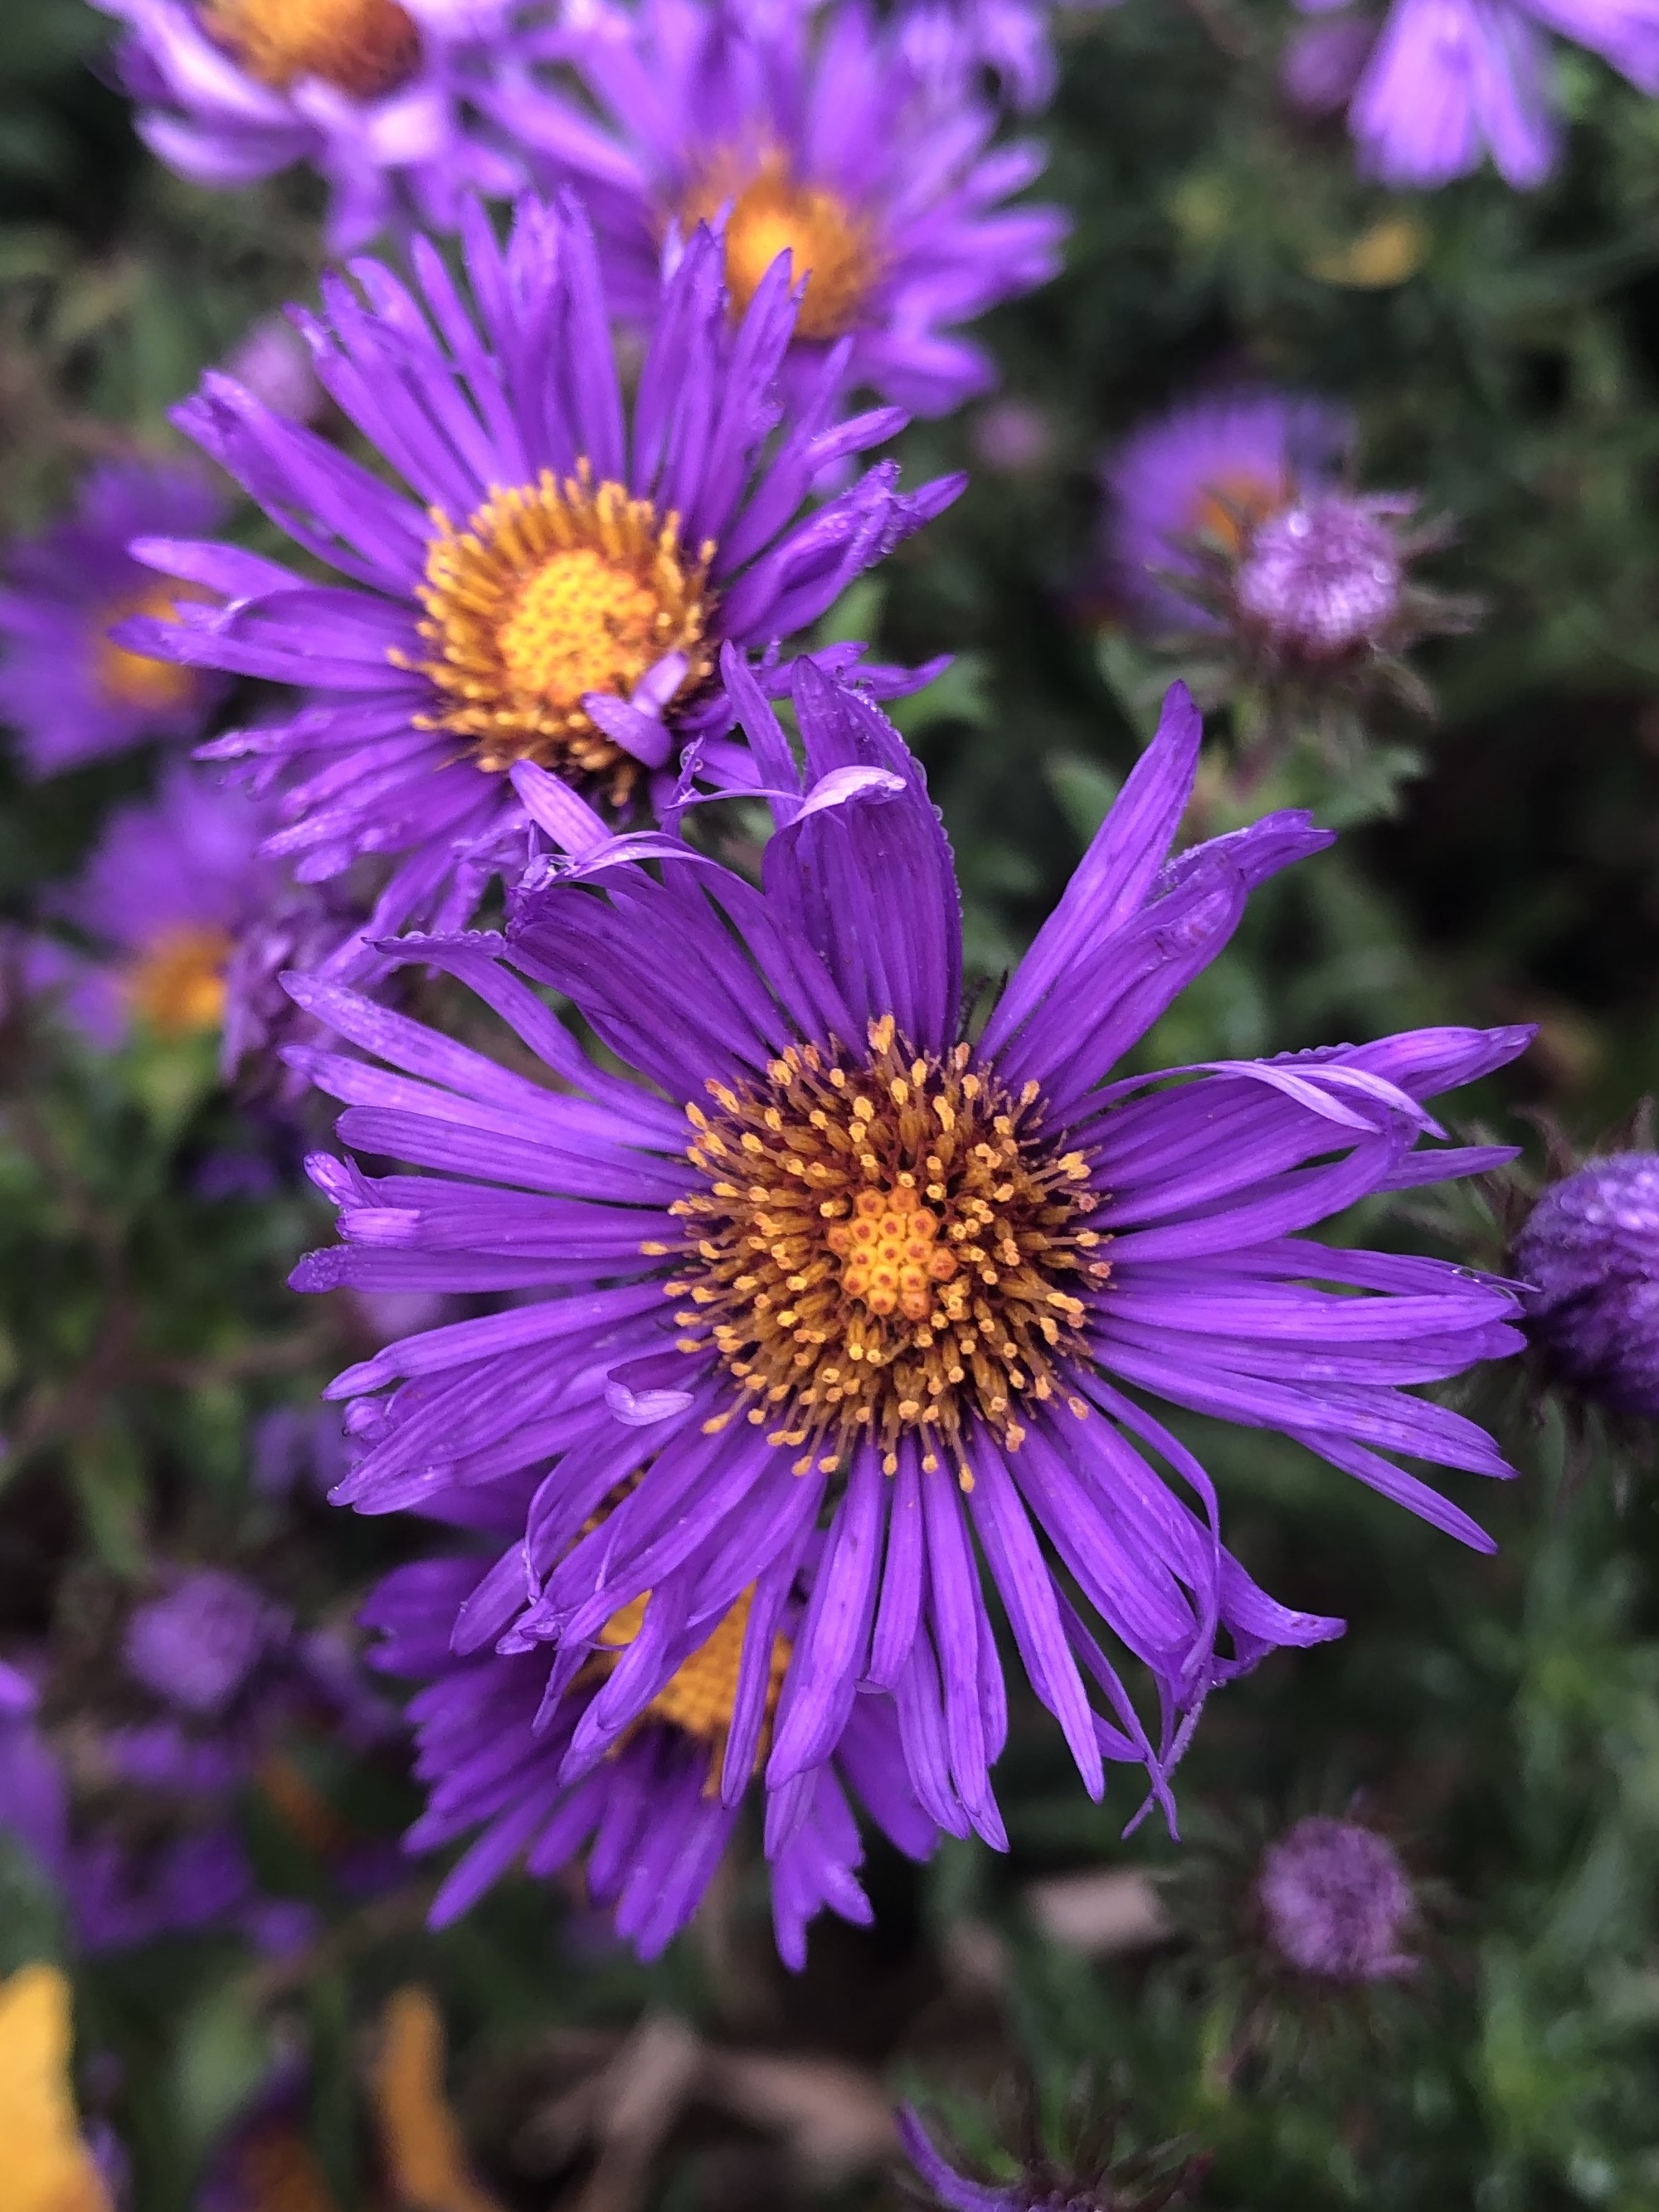 New England Aster on bank of retaining pond  in Madison, Wisconsin on September 17, 2019.